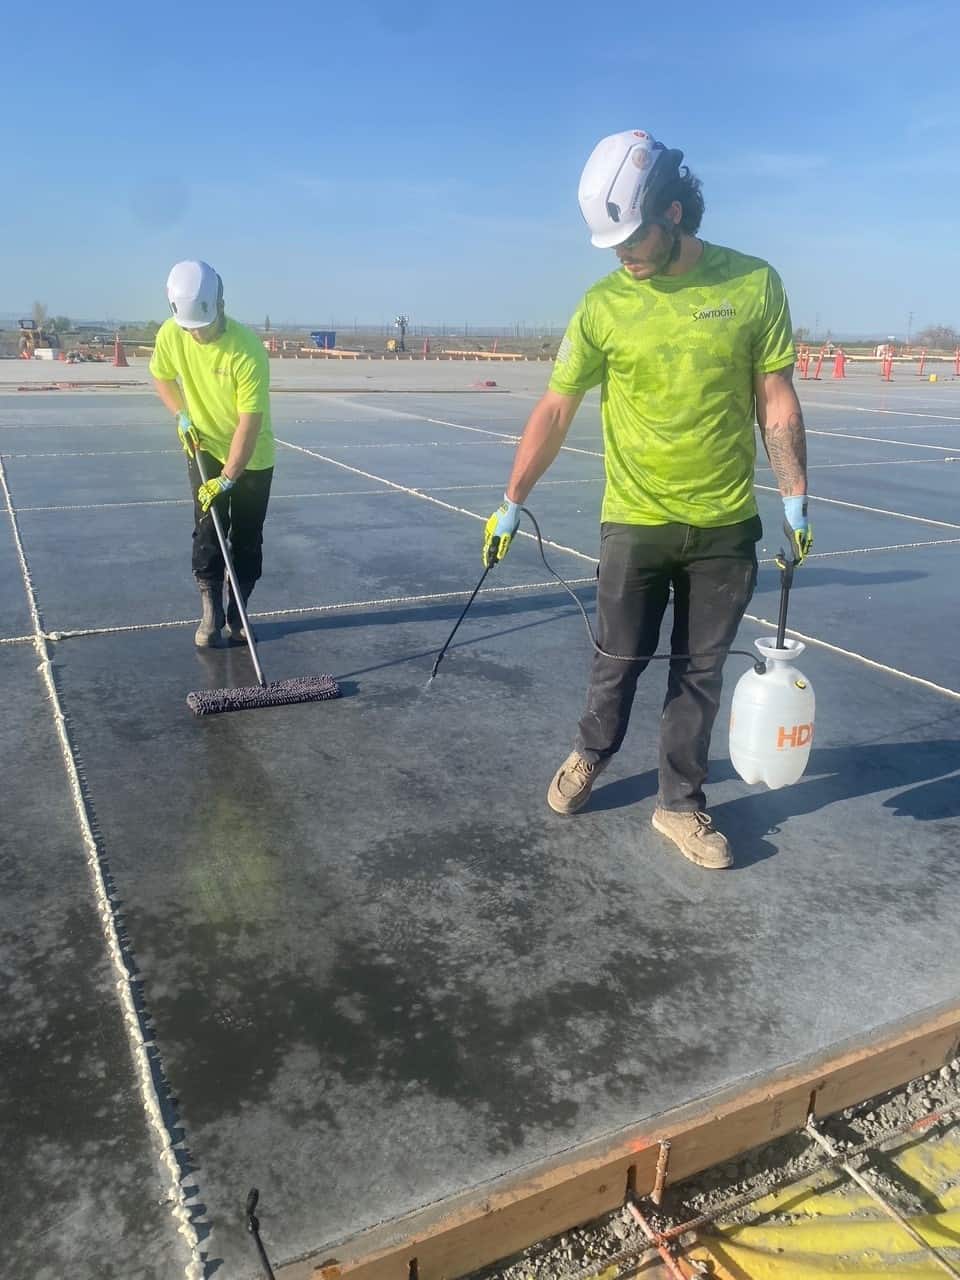 Sawtooth Caulking applies Consolideck products to newly placed concrete